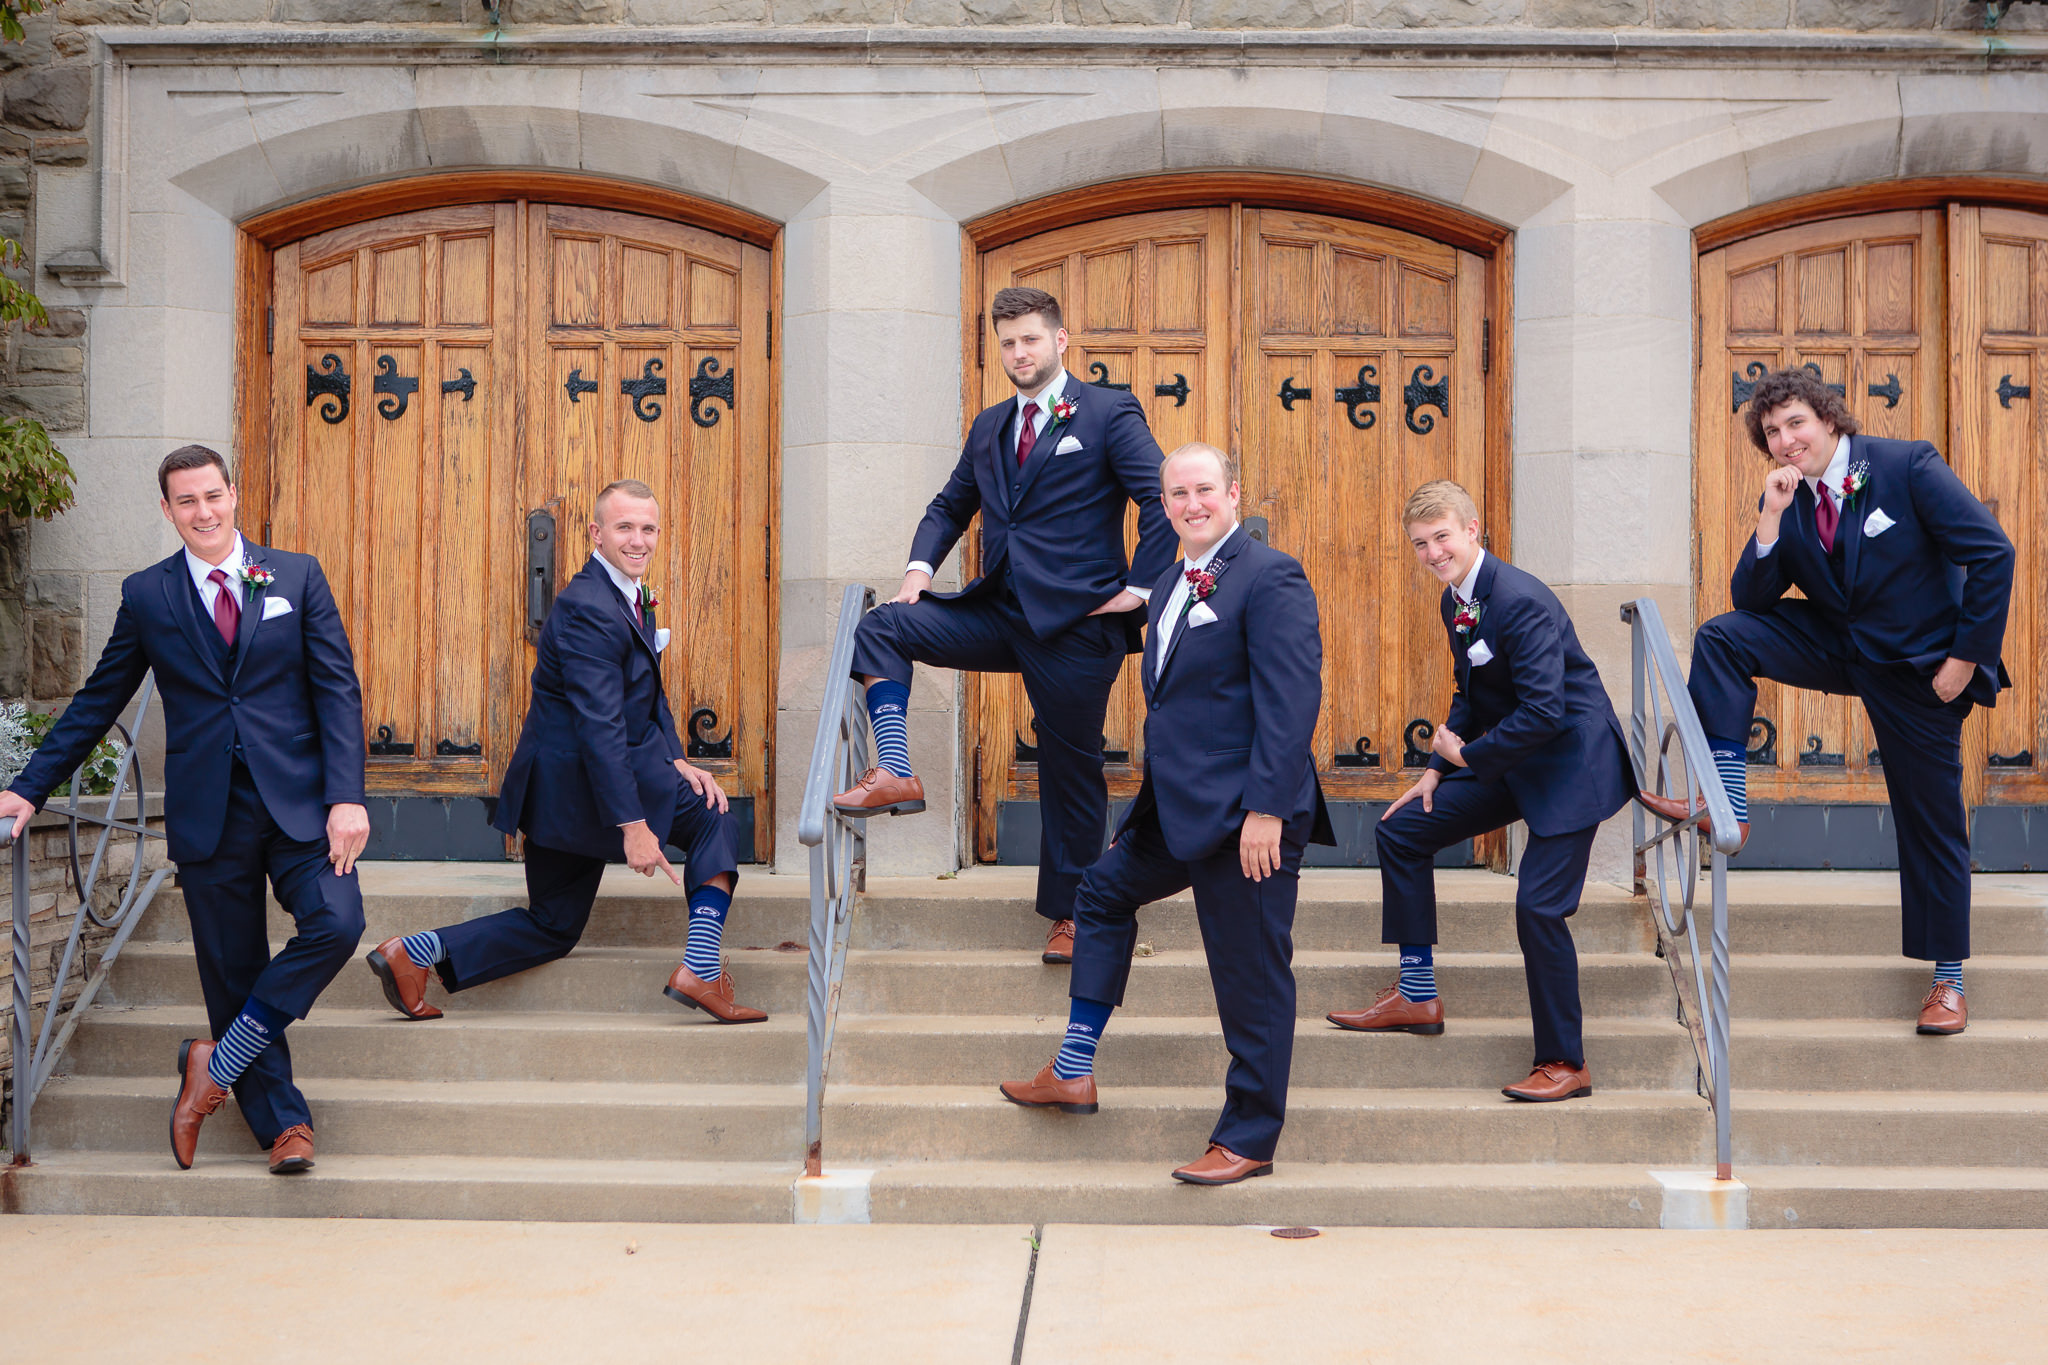 The groom and groomsmen showing off their fun striped socks outside of Mt. Lebanon United Methodist Church